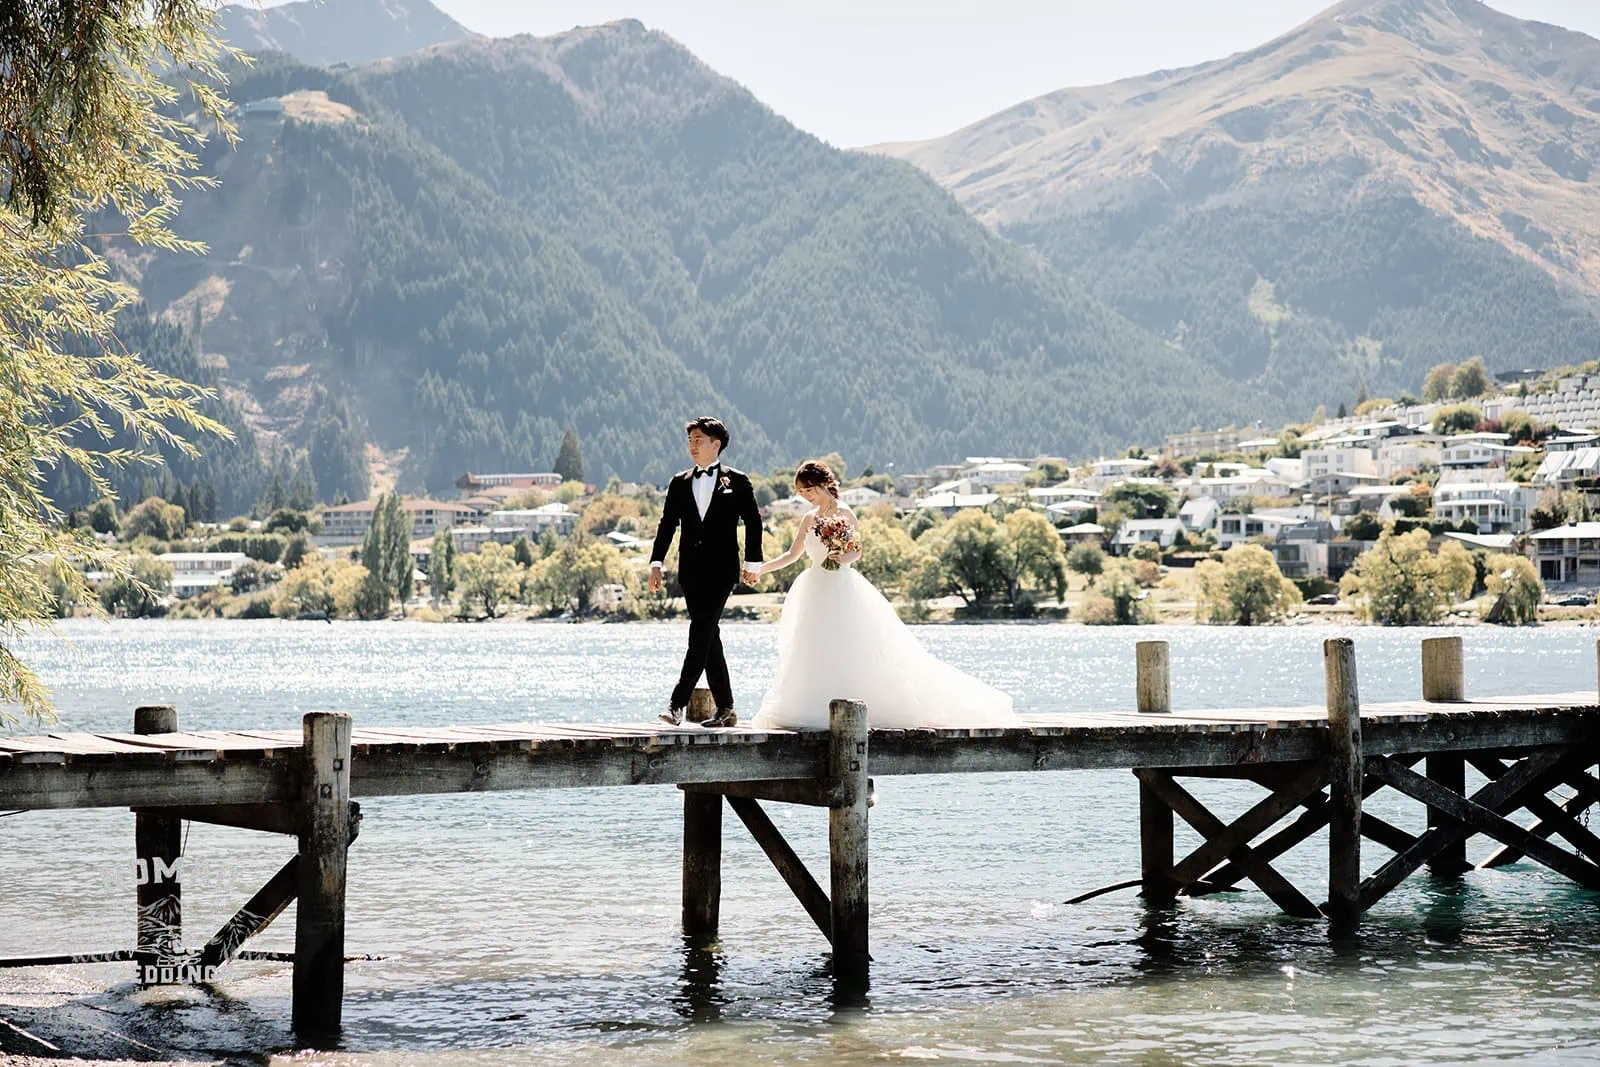 QUICK GUIDE TO QUEENSTOWN’S SUMMER GROUND SPOTS